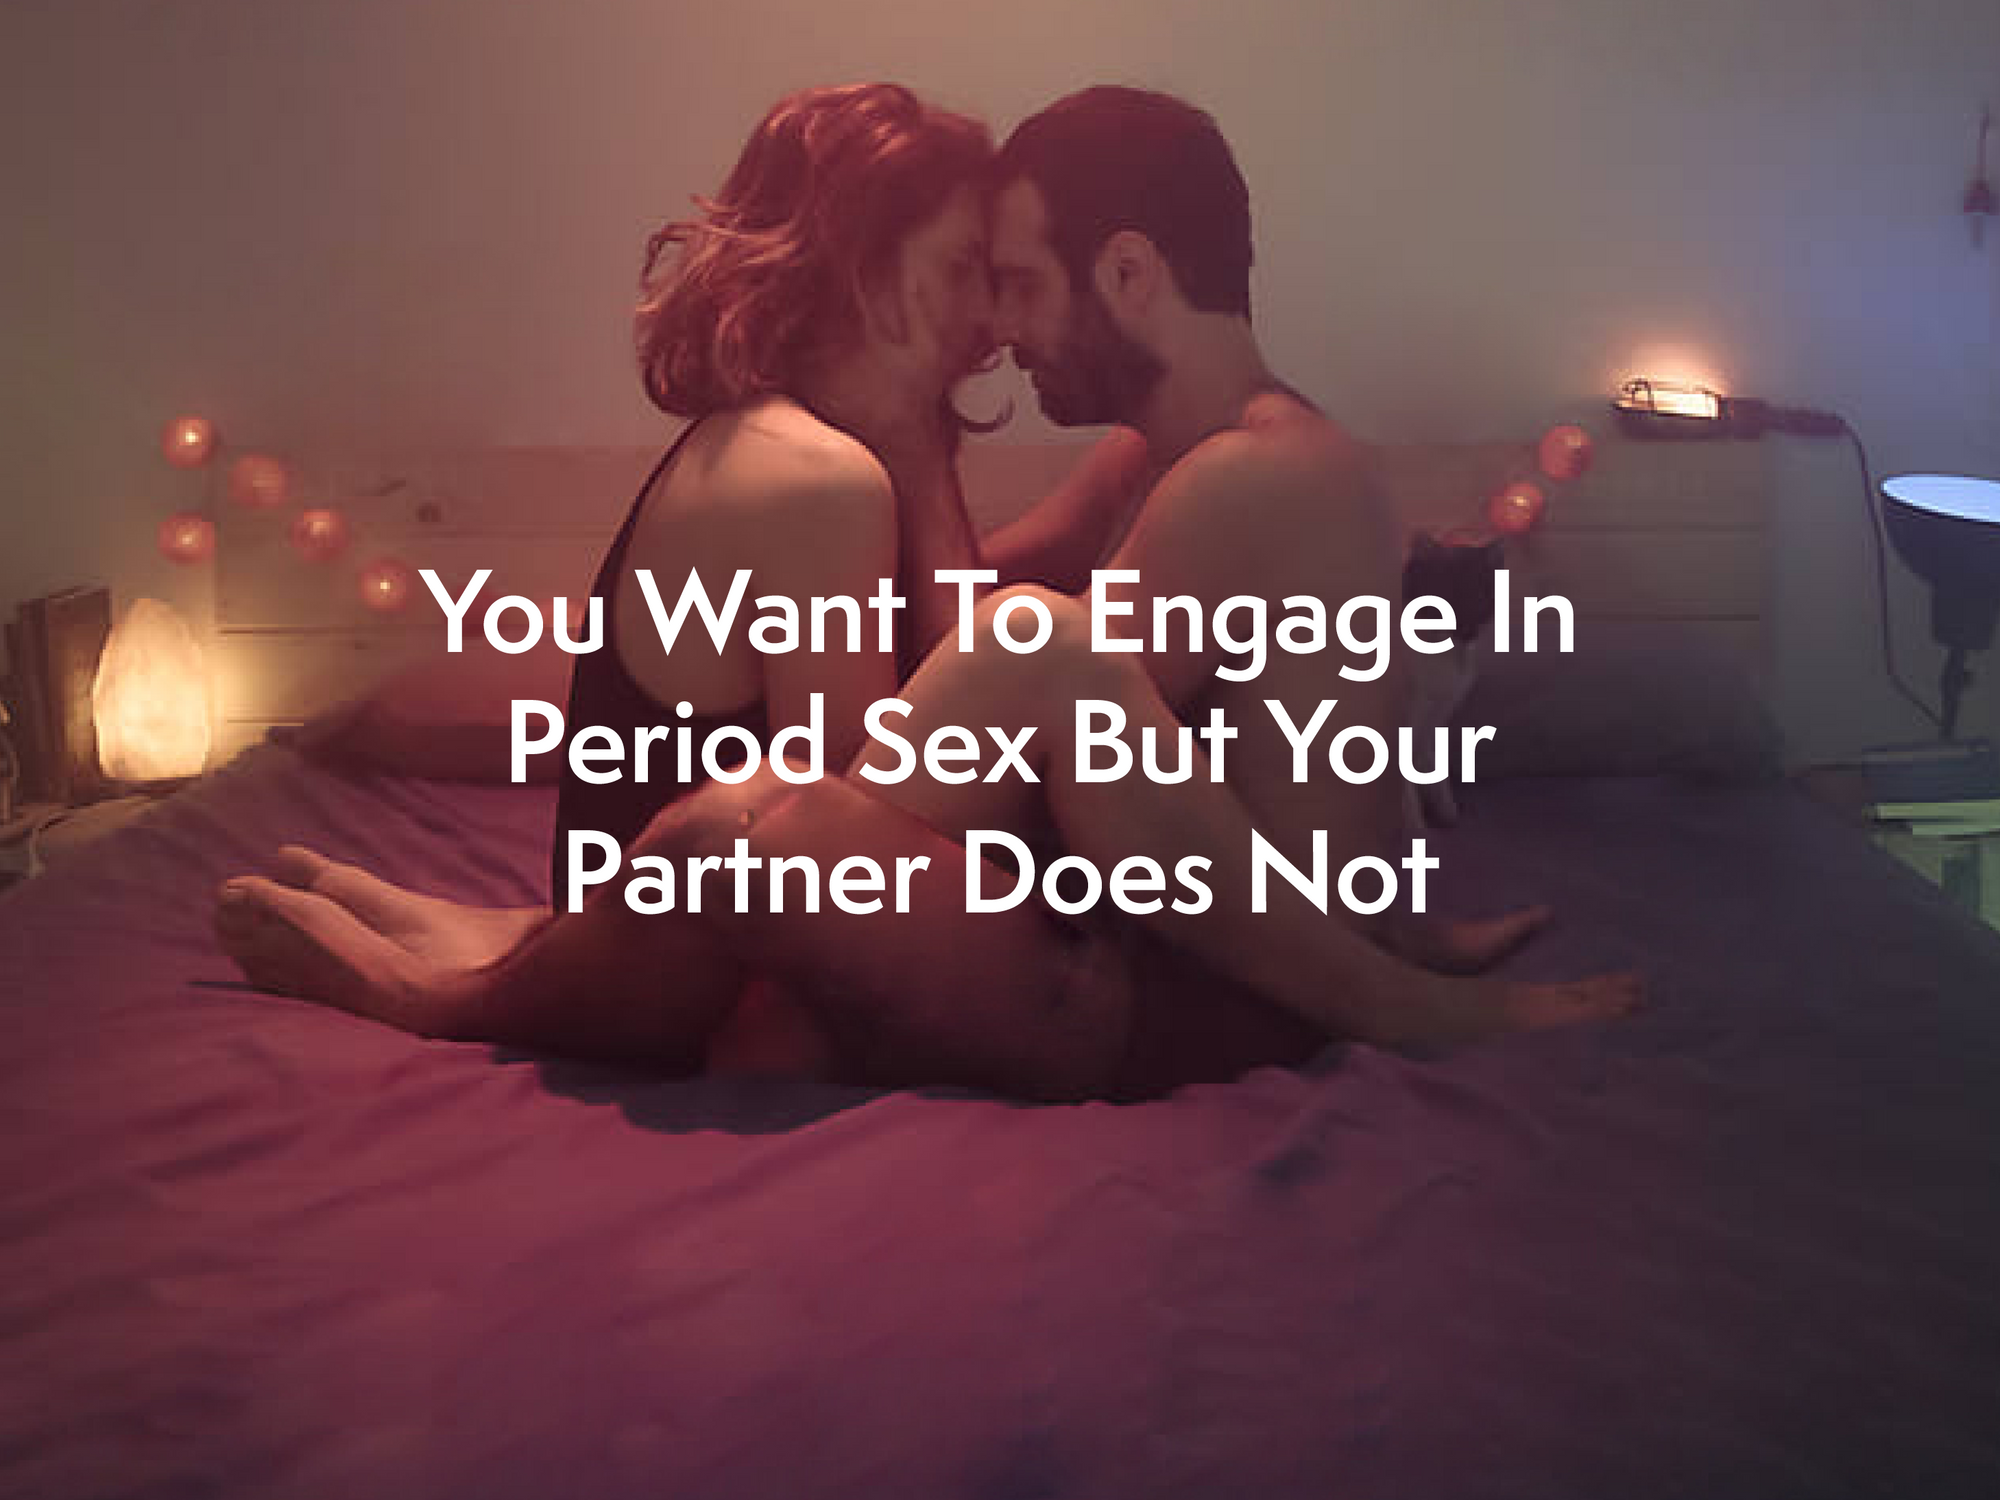 Exactly What To Do When You Want To Engage In Period Sex But Your Partner Does Not